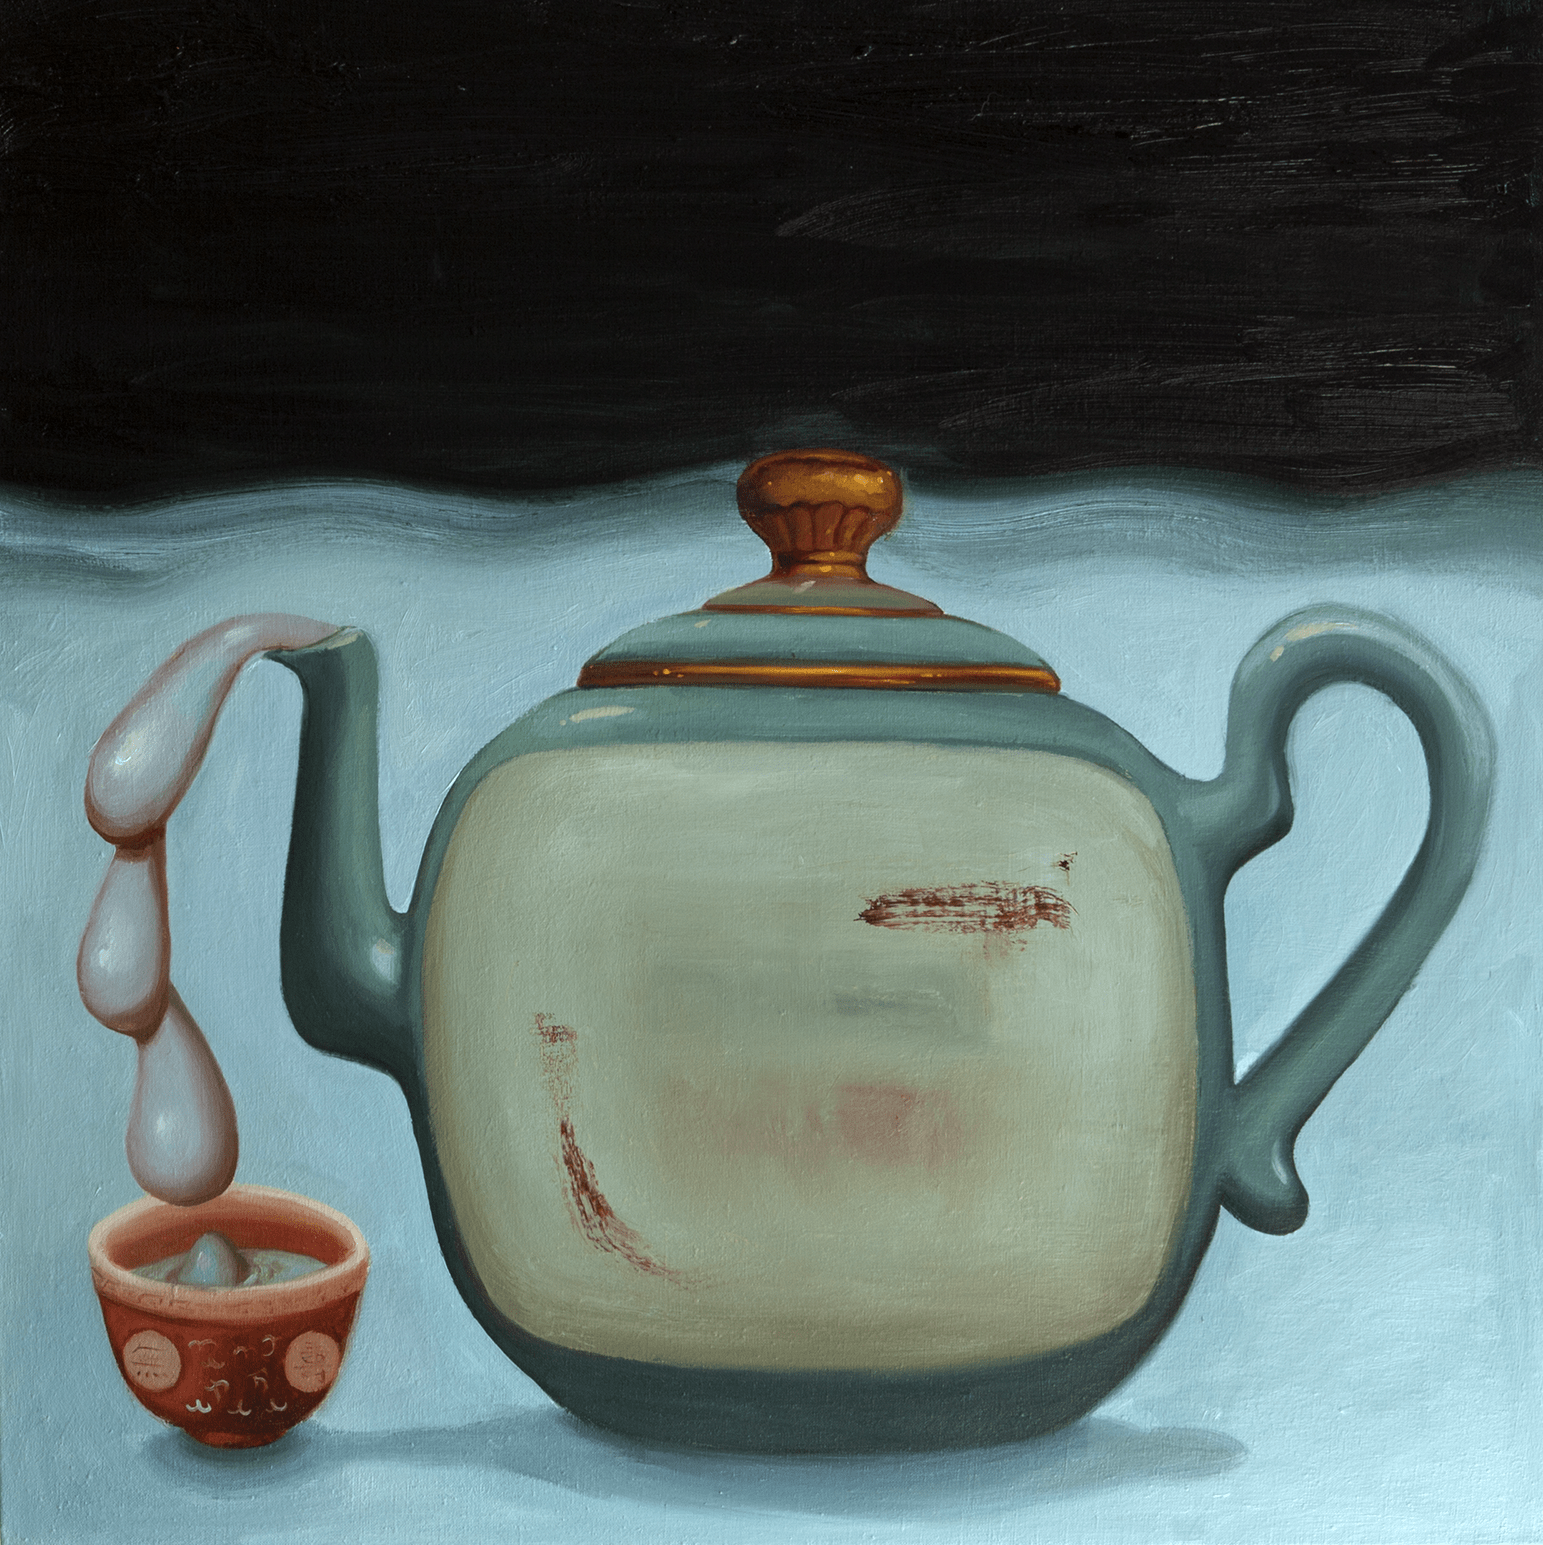 Dominique Fung's painting 'Tea Time, Me Time'. A tea pot against a blue and black background, with drops of liquid coming from the spout into an east asian tea cup. 